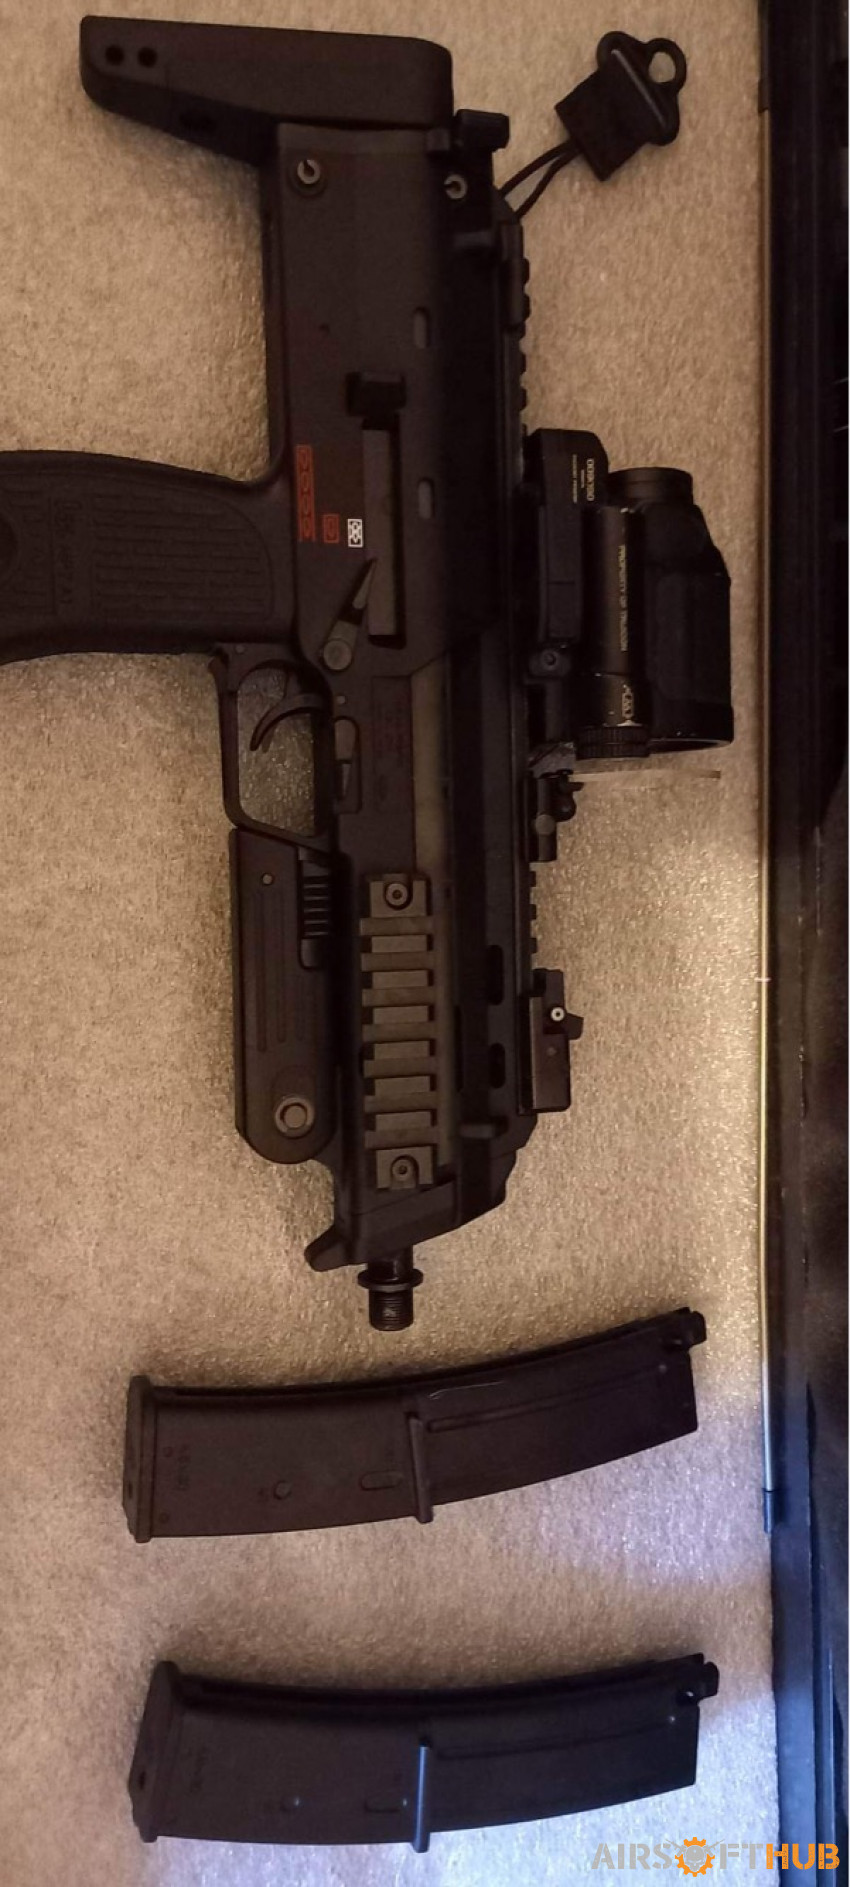 Upgraded TM Mp7a1 GBB - Used airsoft equipment